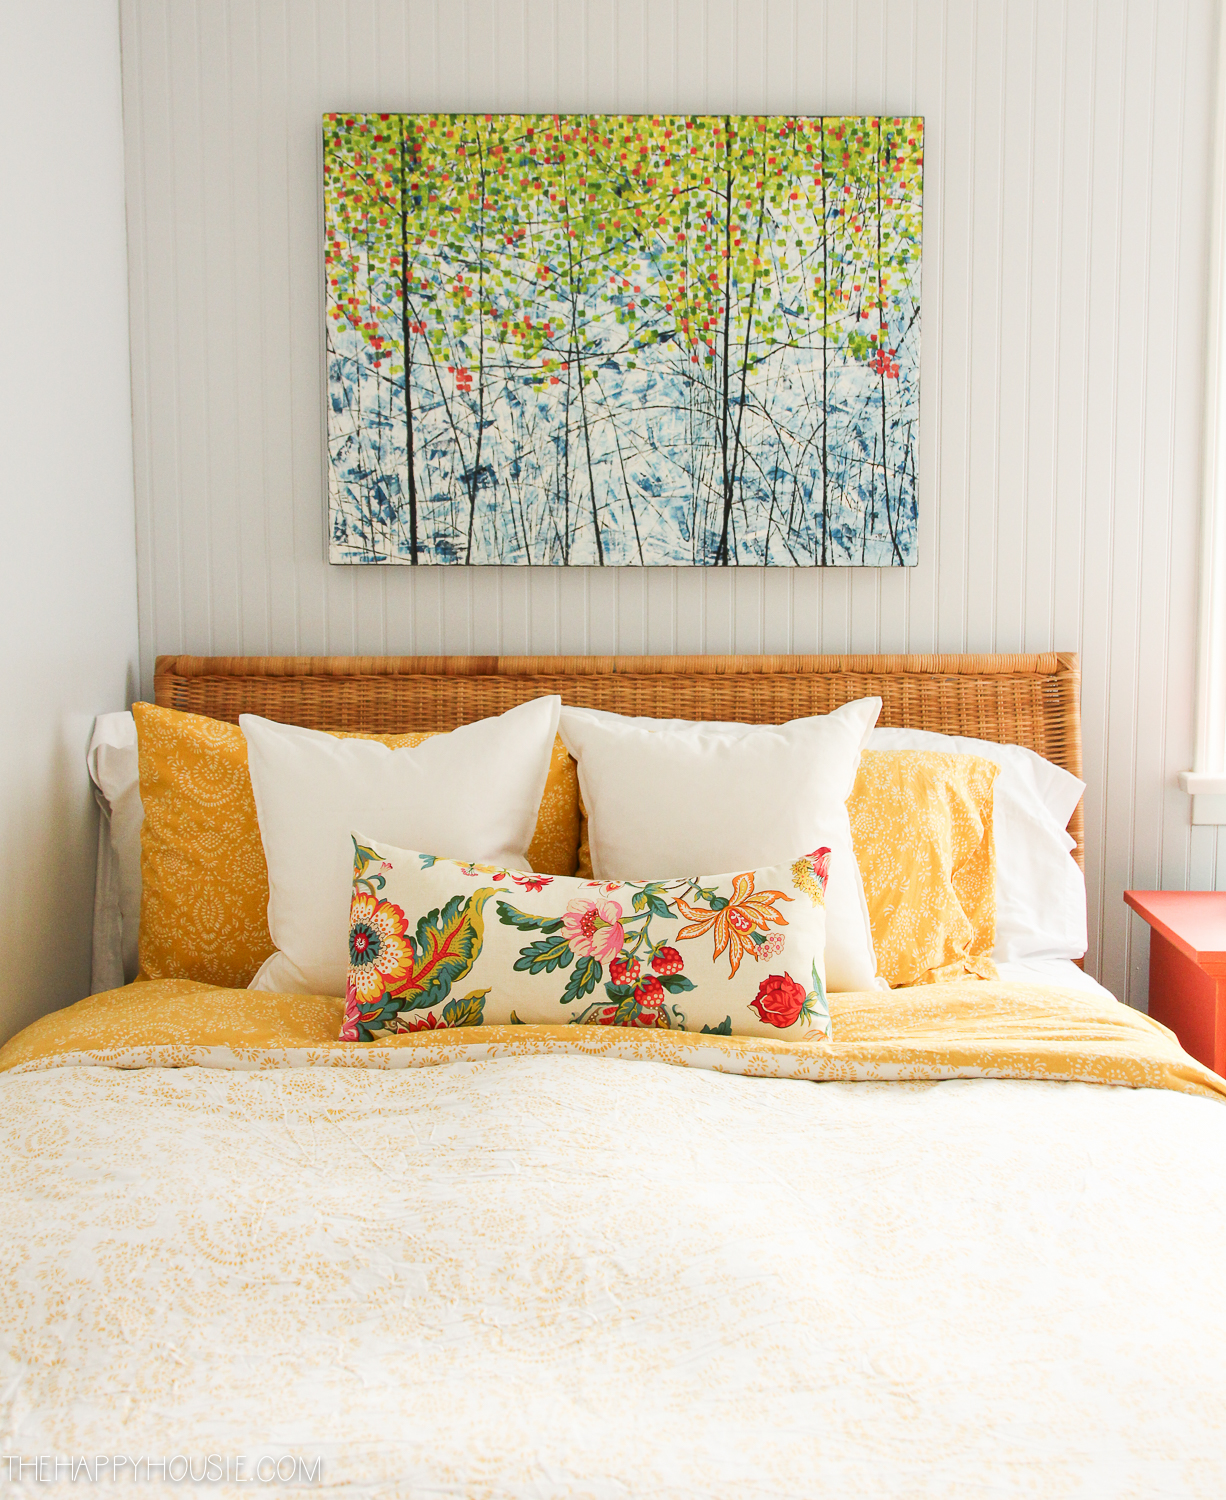 There are throw pillows on the bed in floral and light yellow.